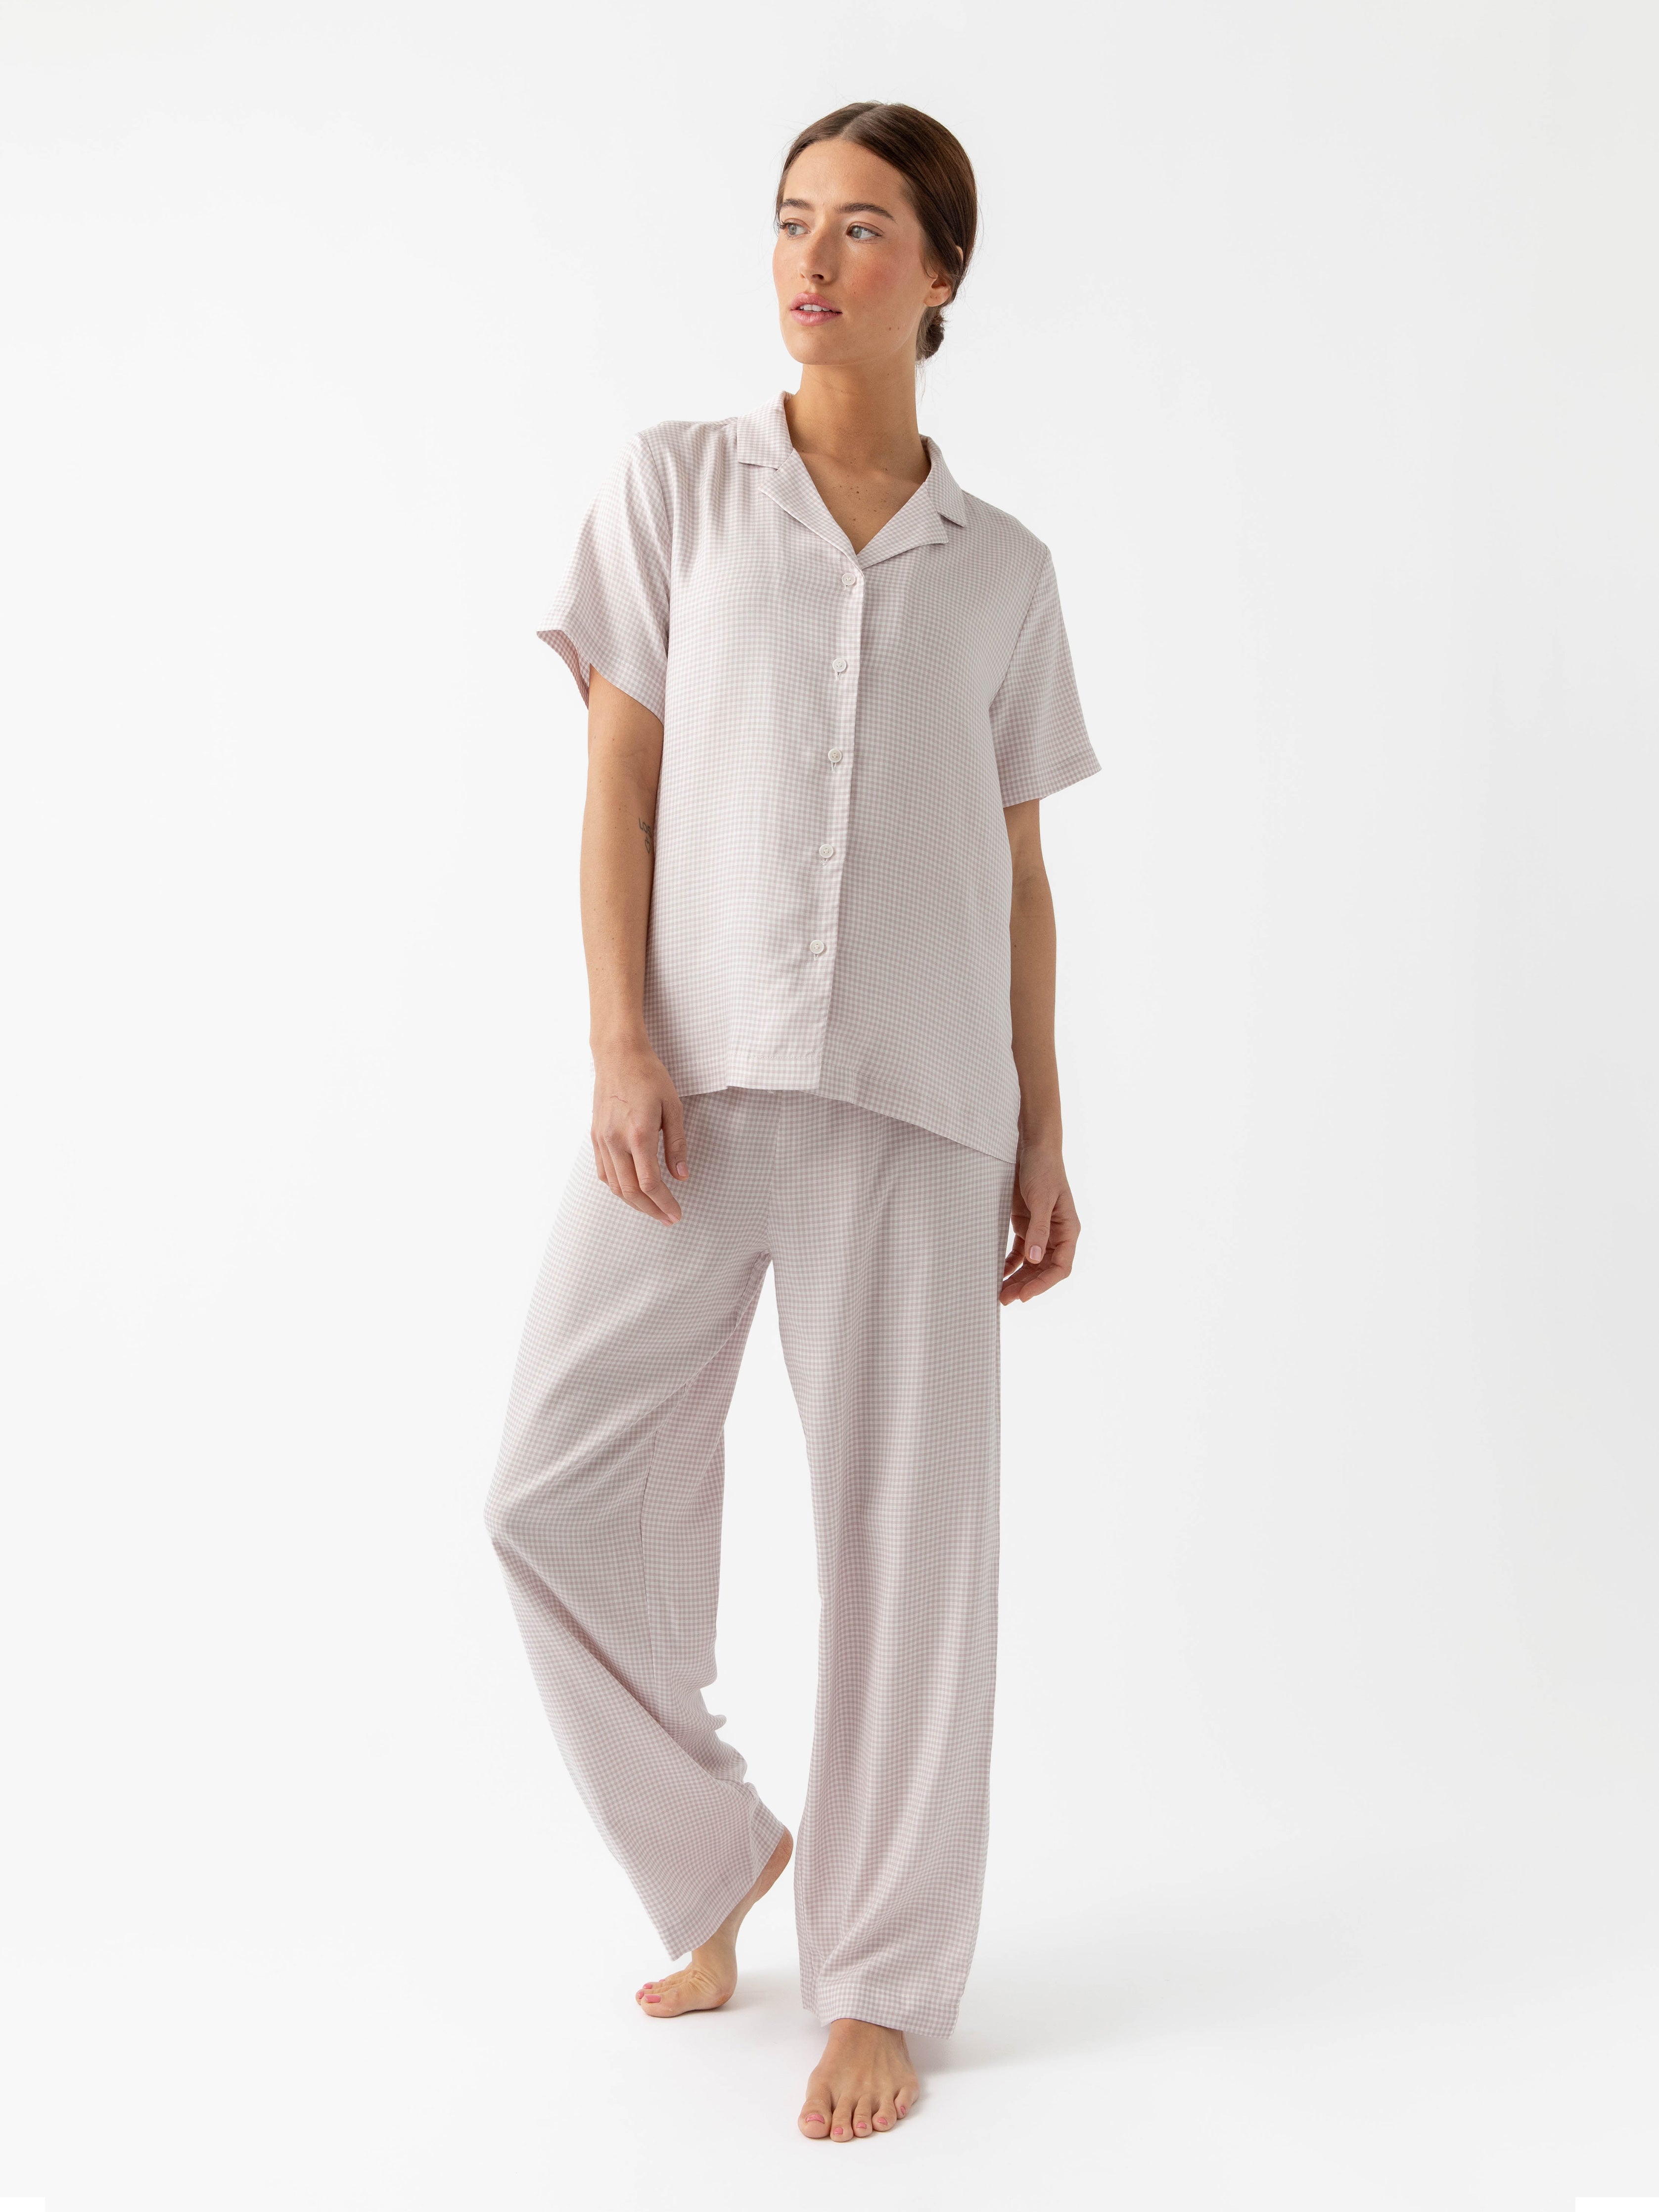 Woman with white background wearing Lavender Mini Gingham Soft Woven Short Sleeve Pajama Set |Color:Lavender Mini Gingham